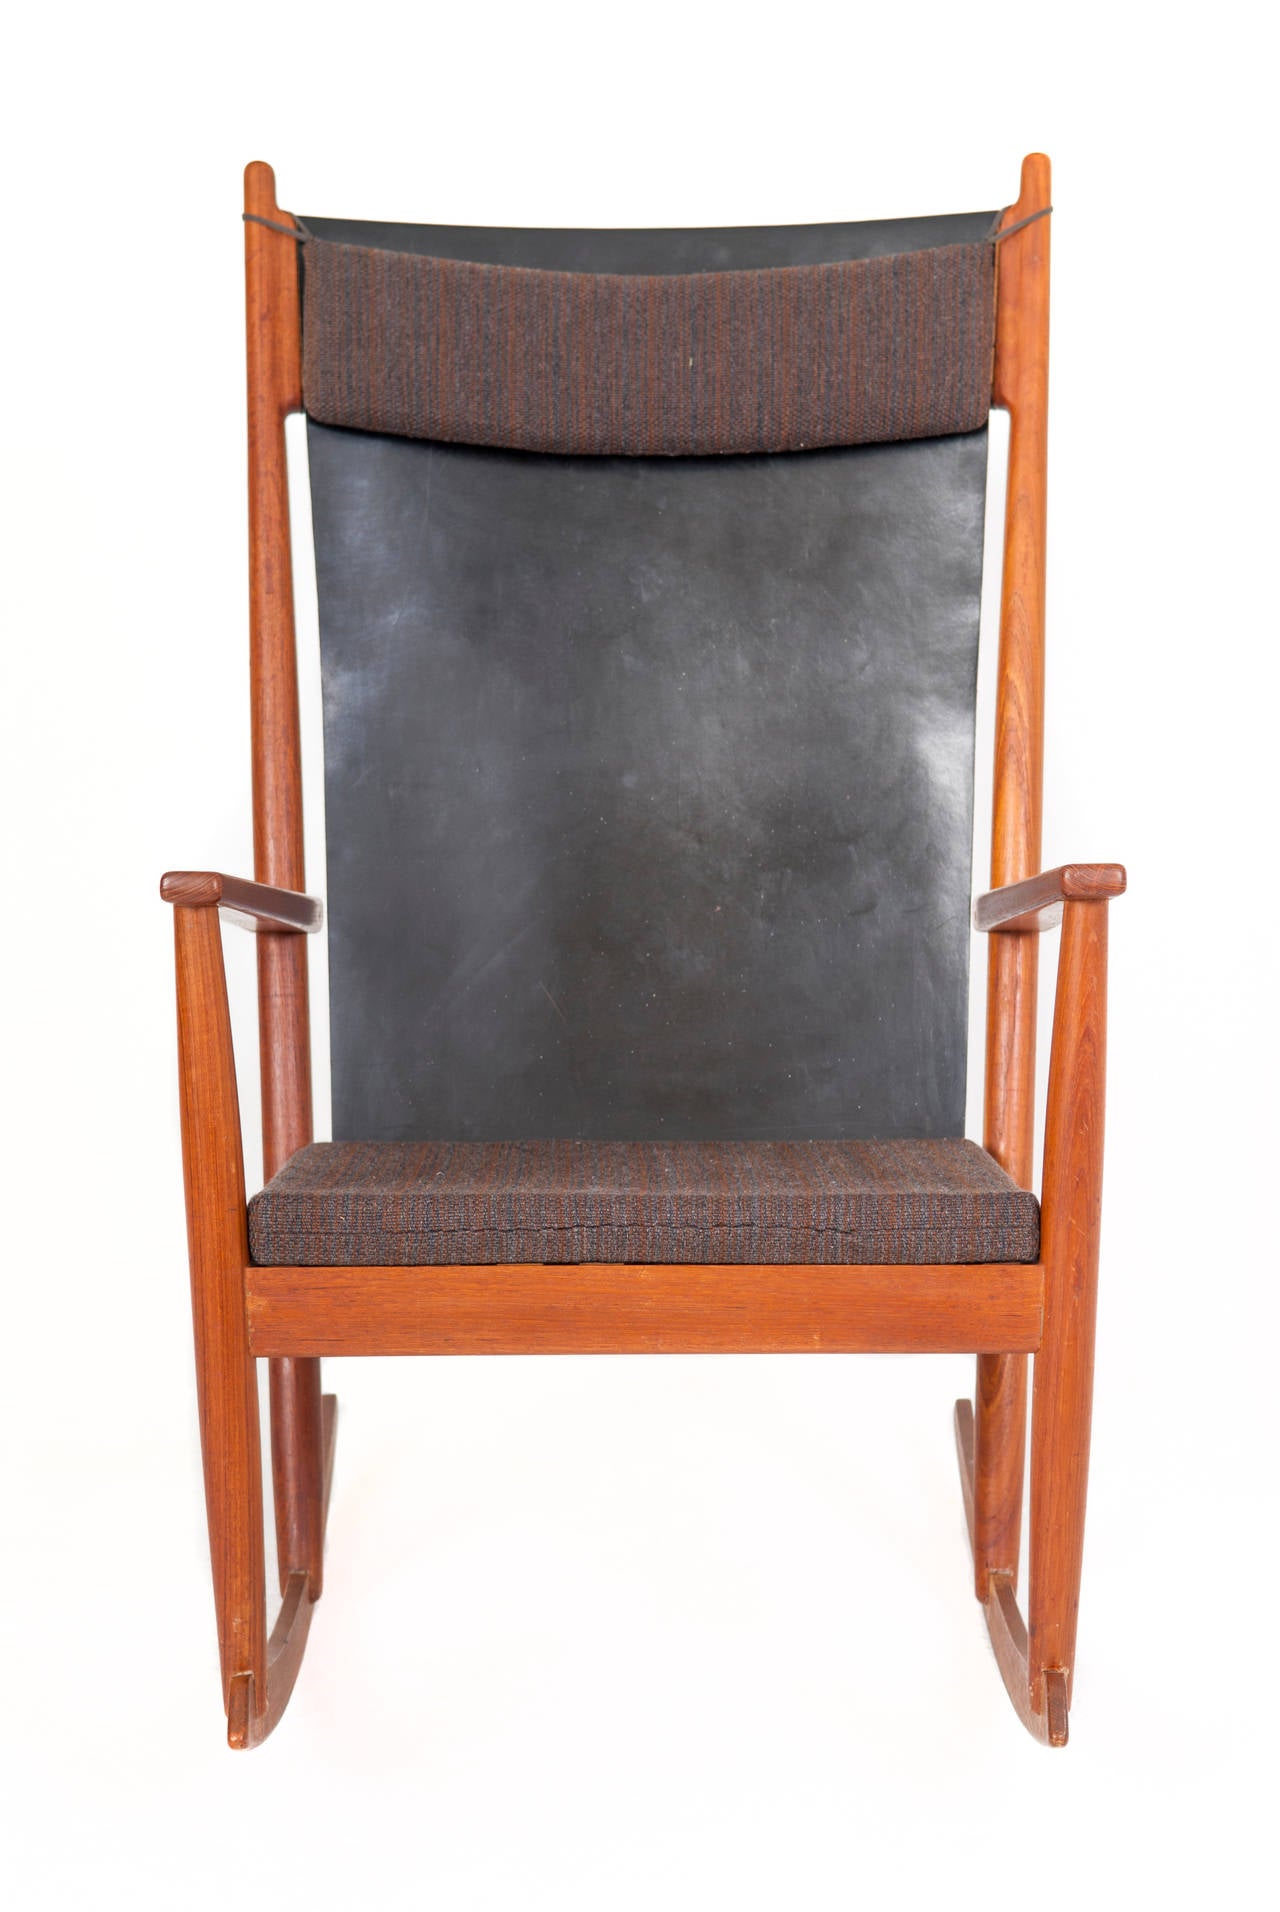 Hans Olsen Rocking chair. Made in teak and fitted with original cusin and  leather back.